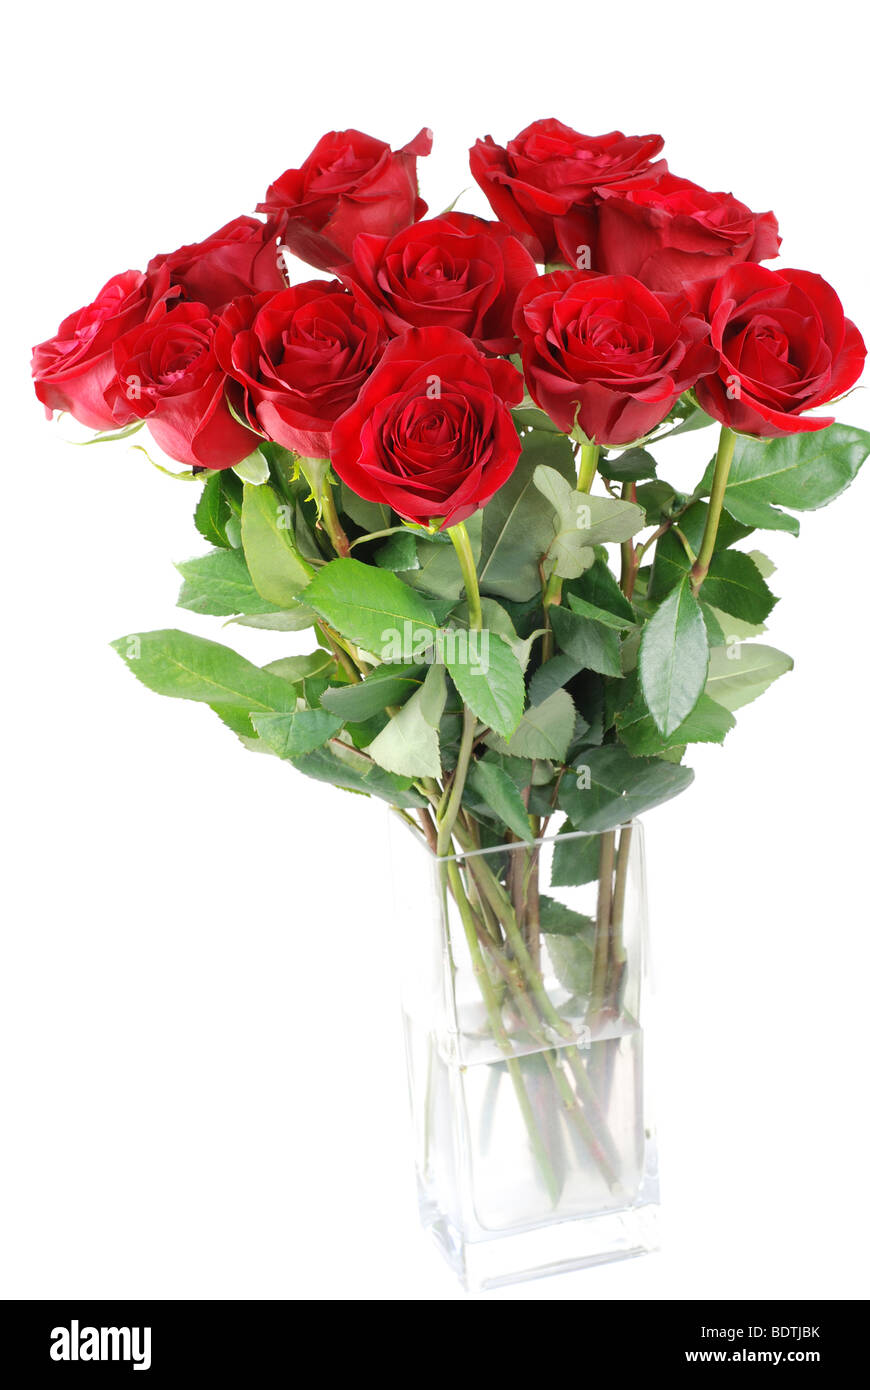 Red roses in a glass vase isolated Stock Photo